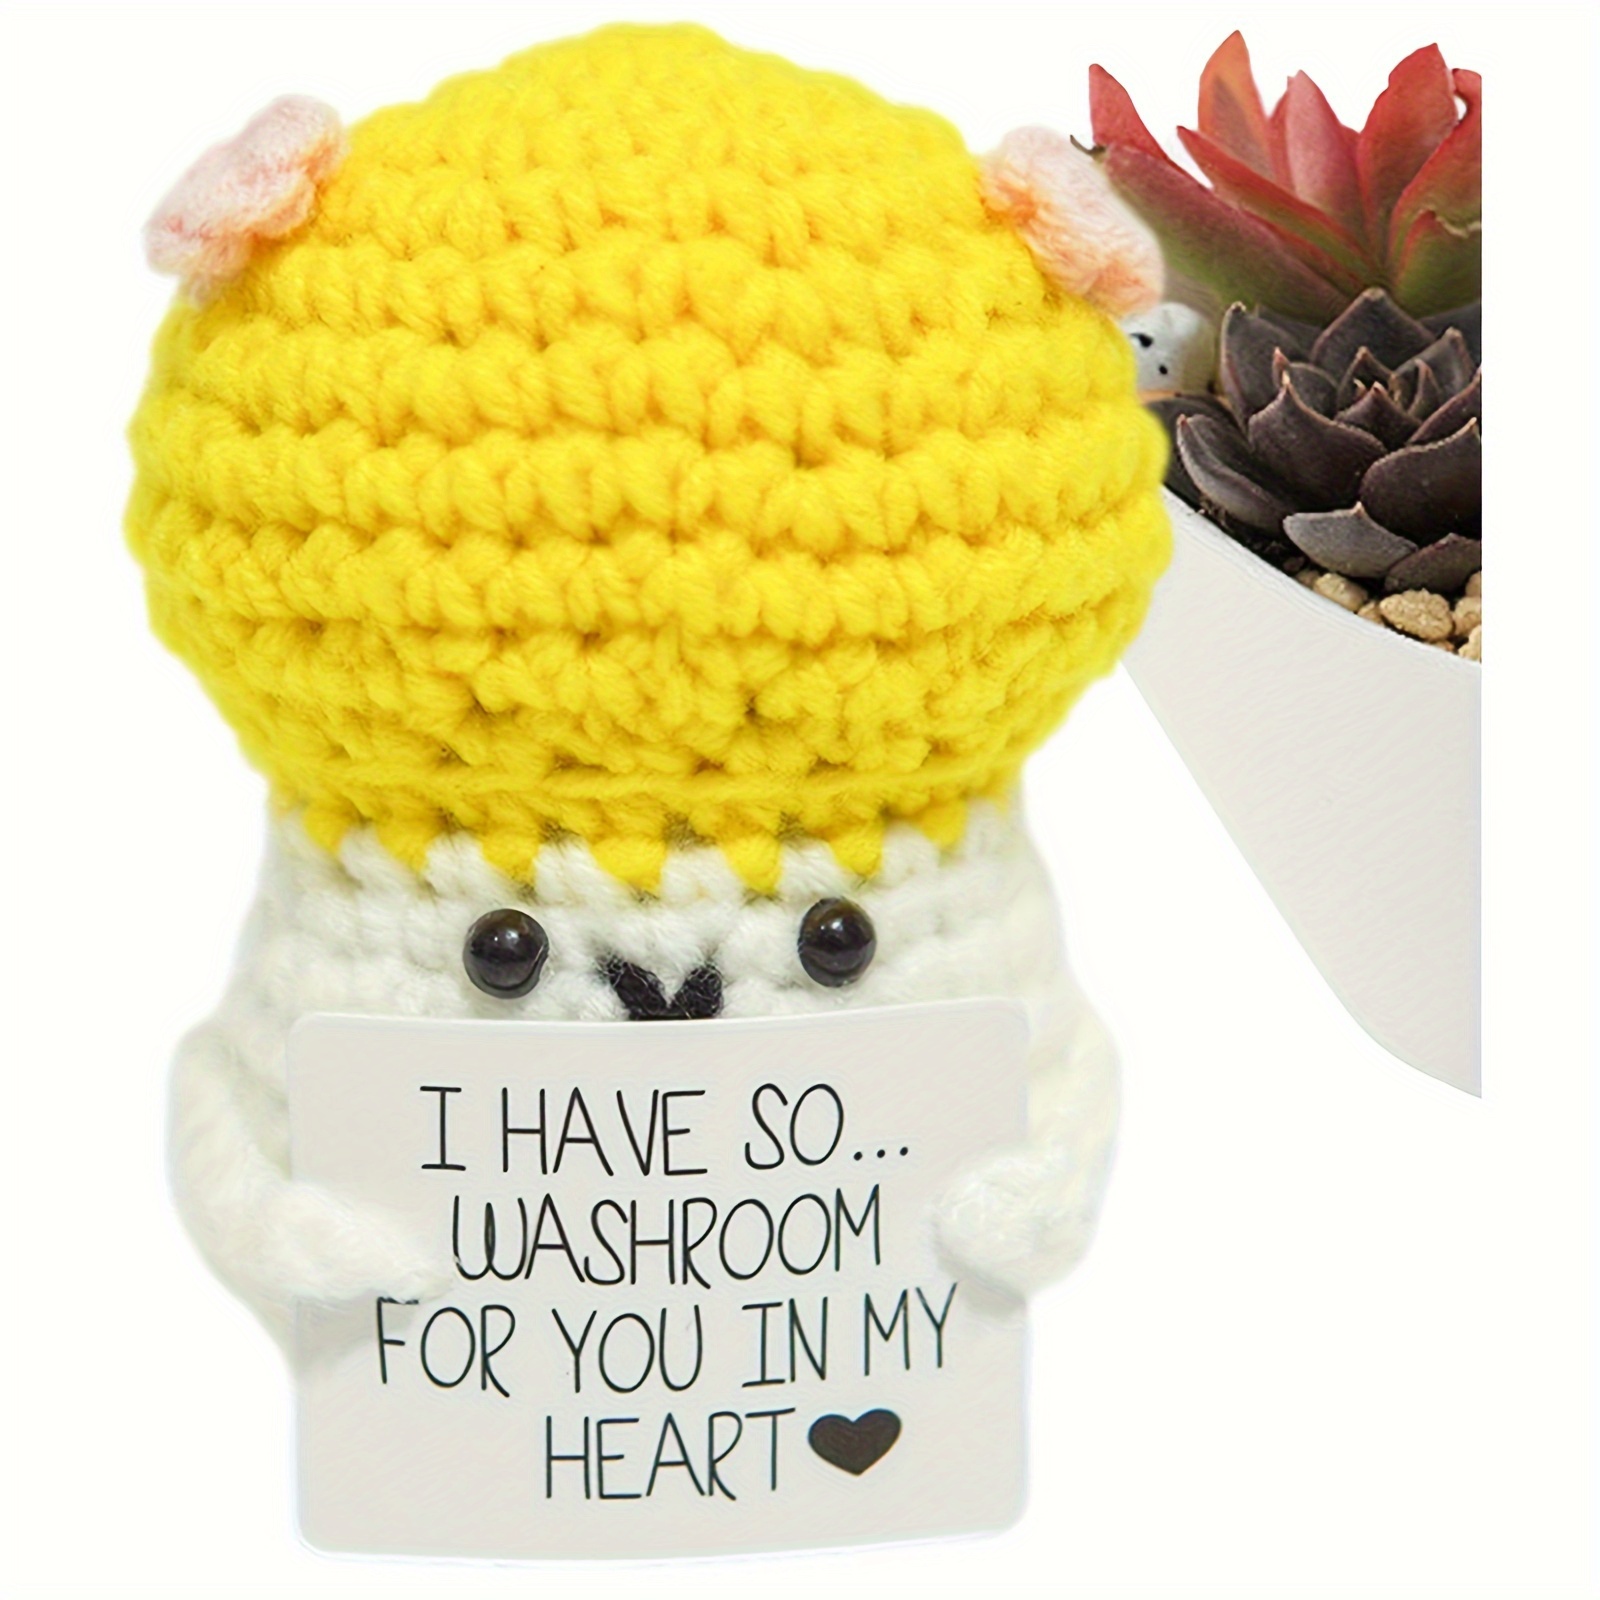 Pickle and Peanut Positive Support Friendship Crochet Set